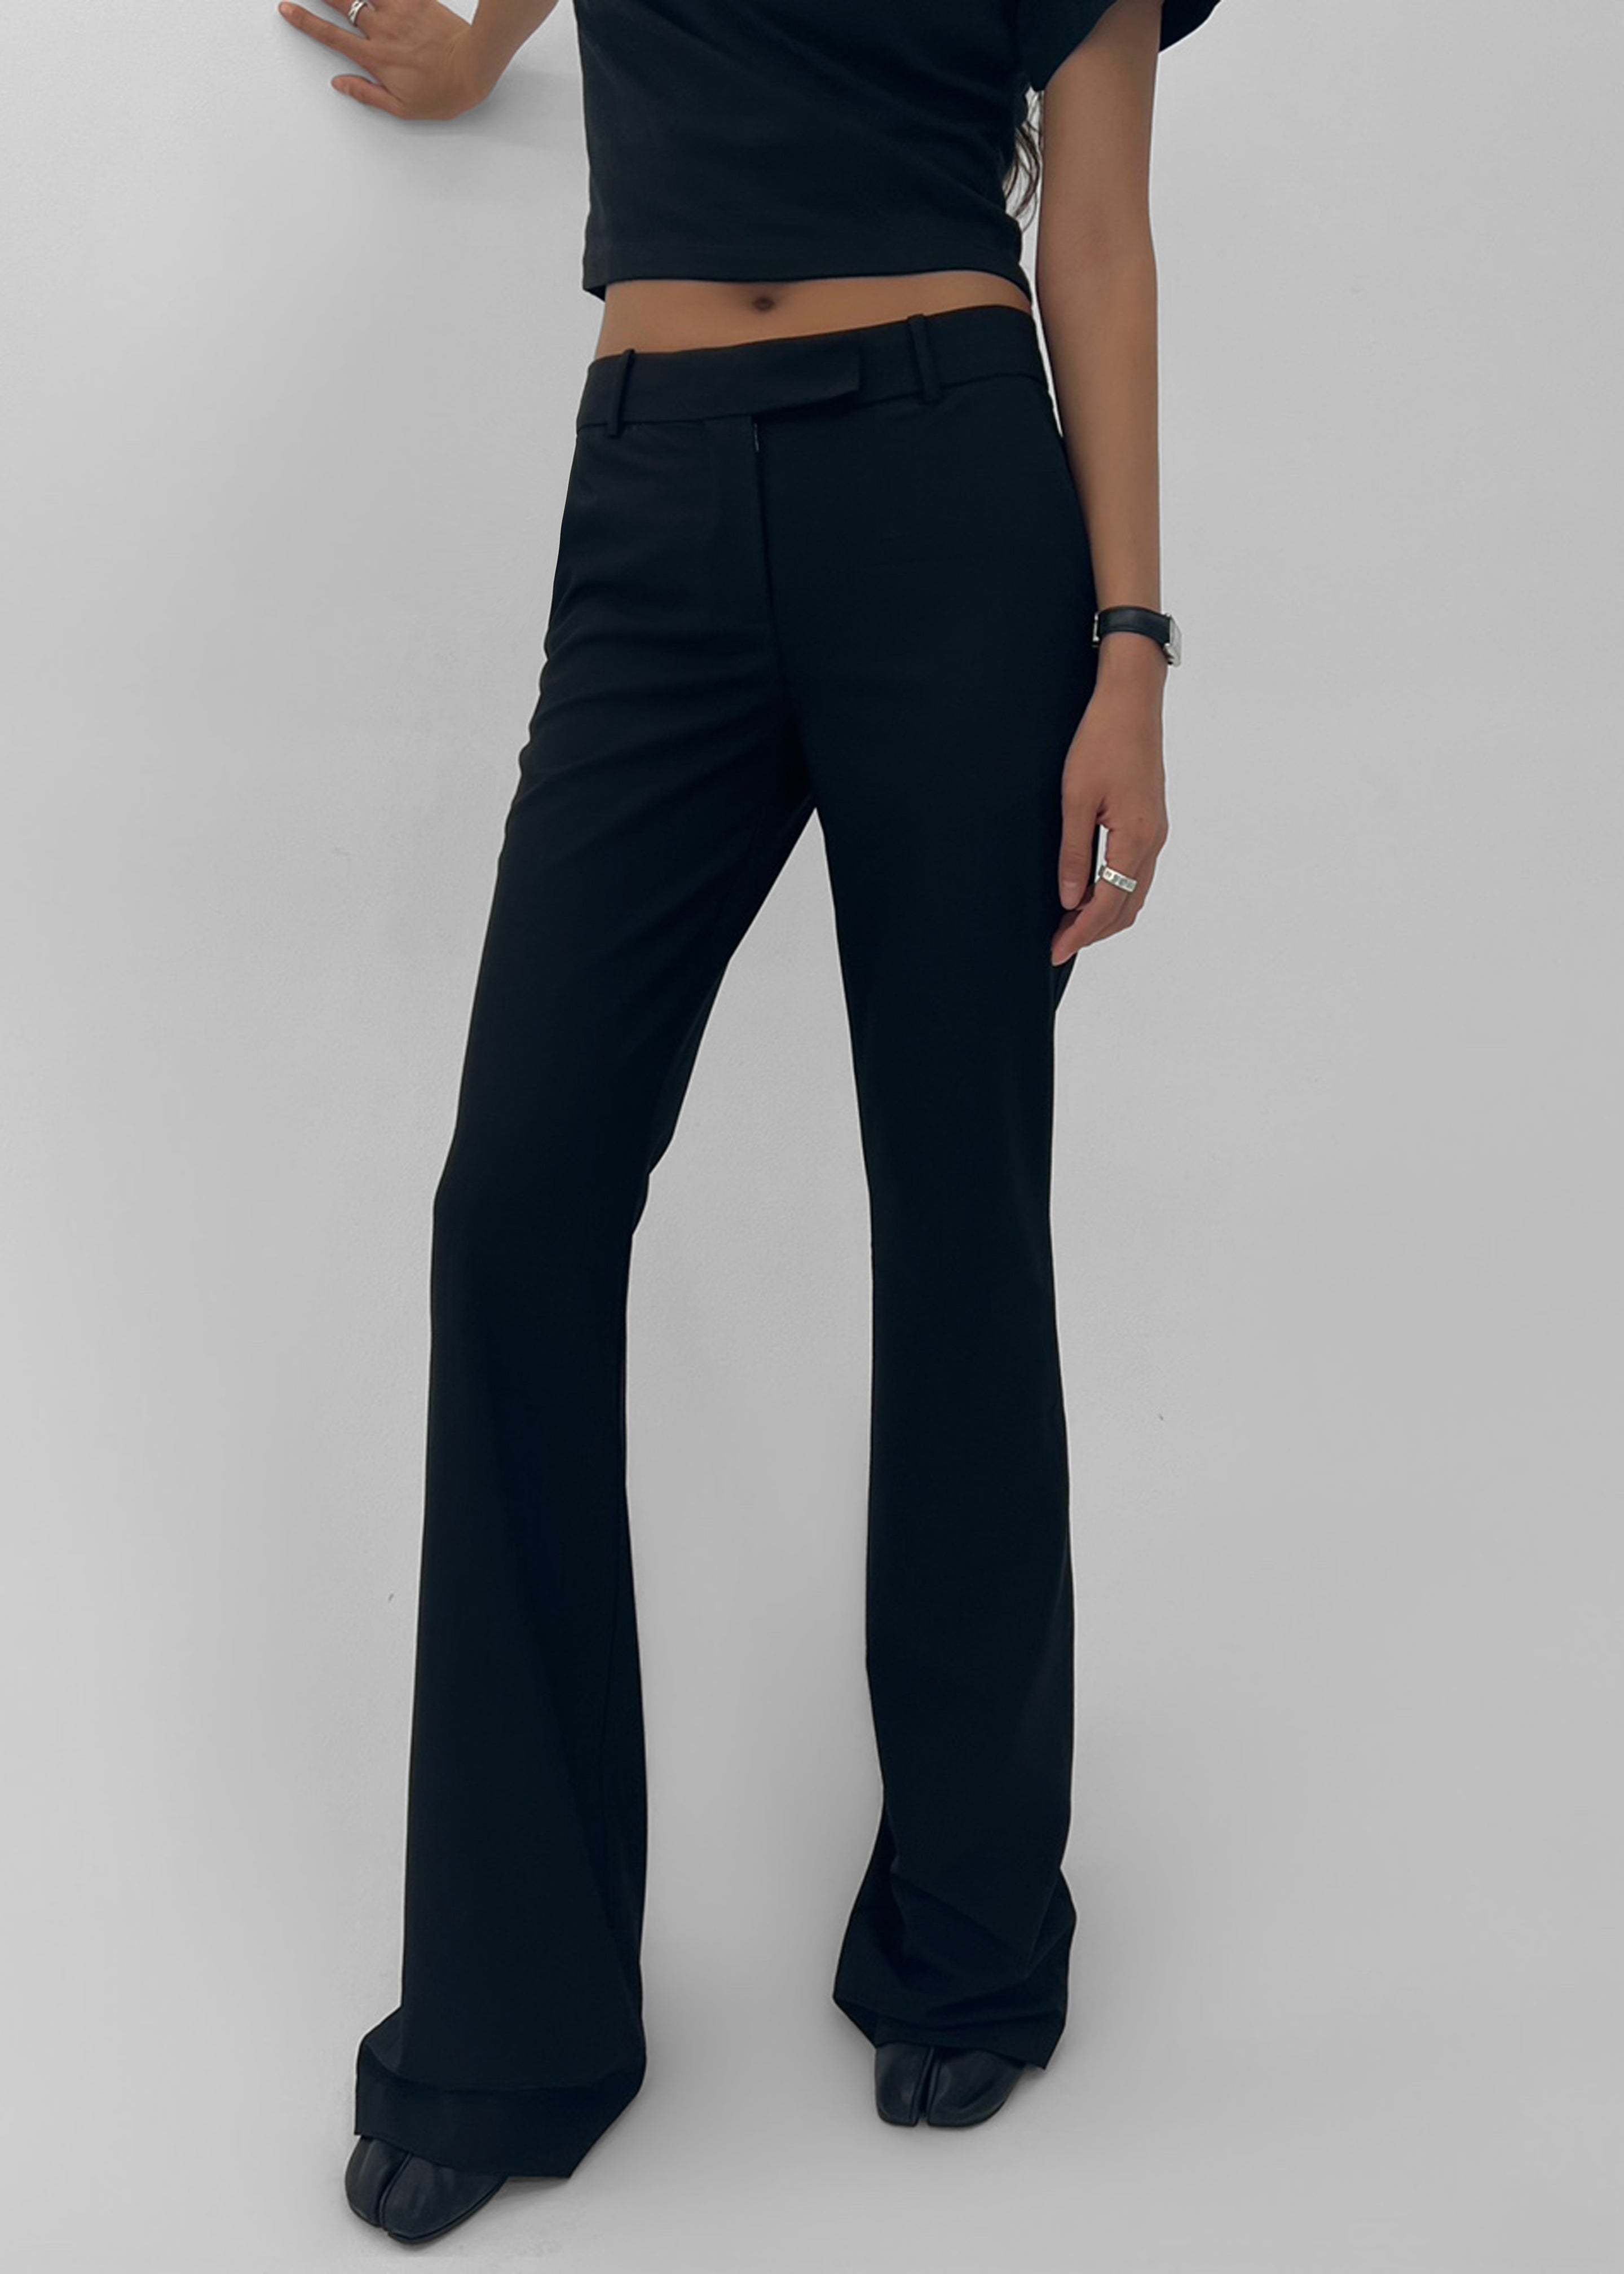 Top more than 222 bootcut trousers womens latest